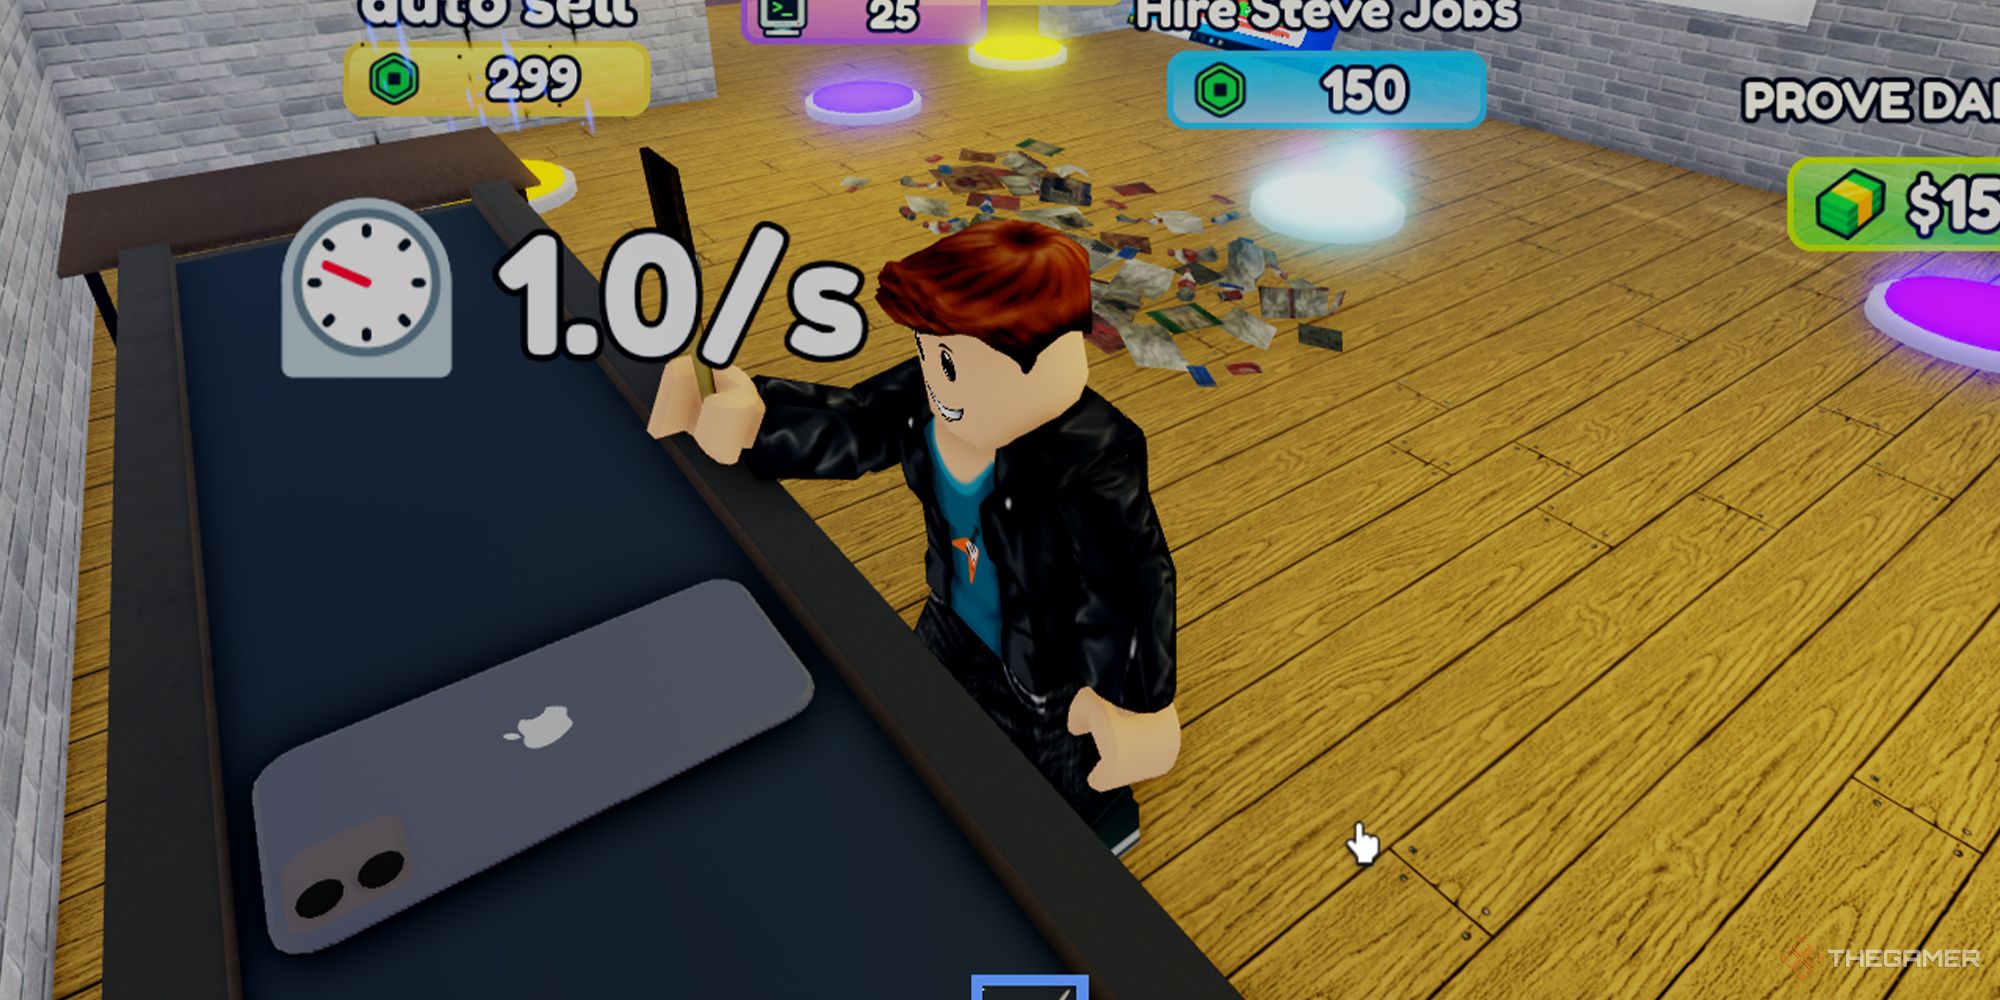 A Roblox character assembles a mobile phone on a conveyor belt in Prove Dad Wrong By Making Phones.